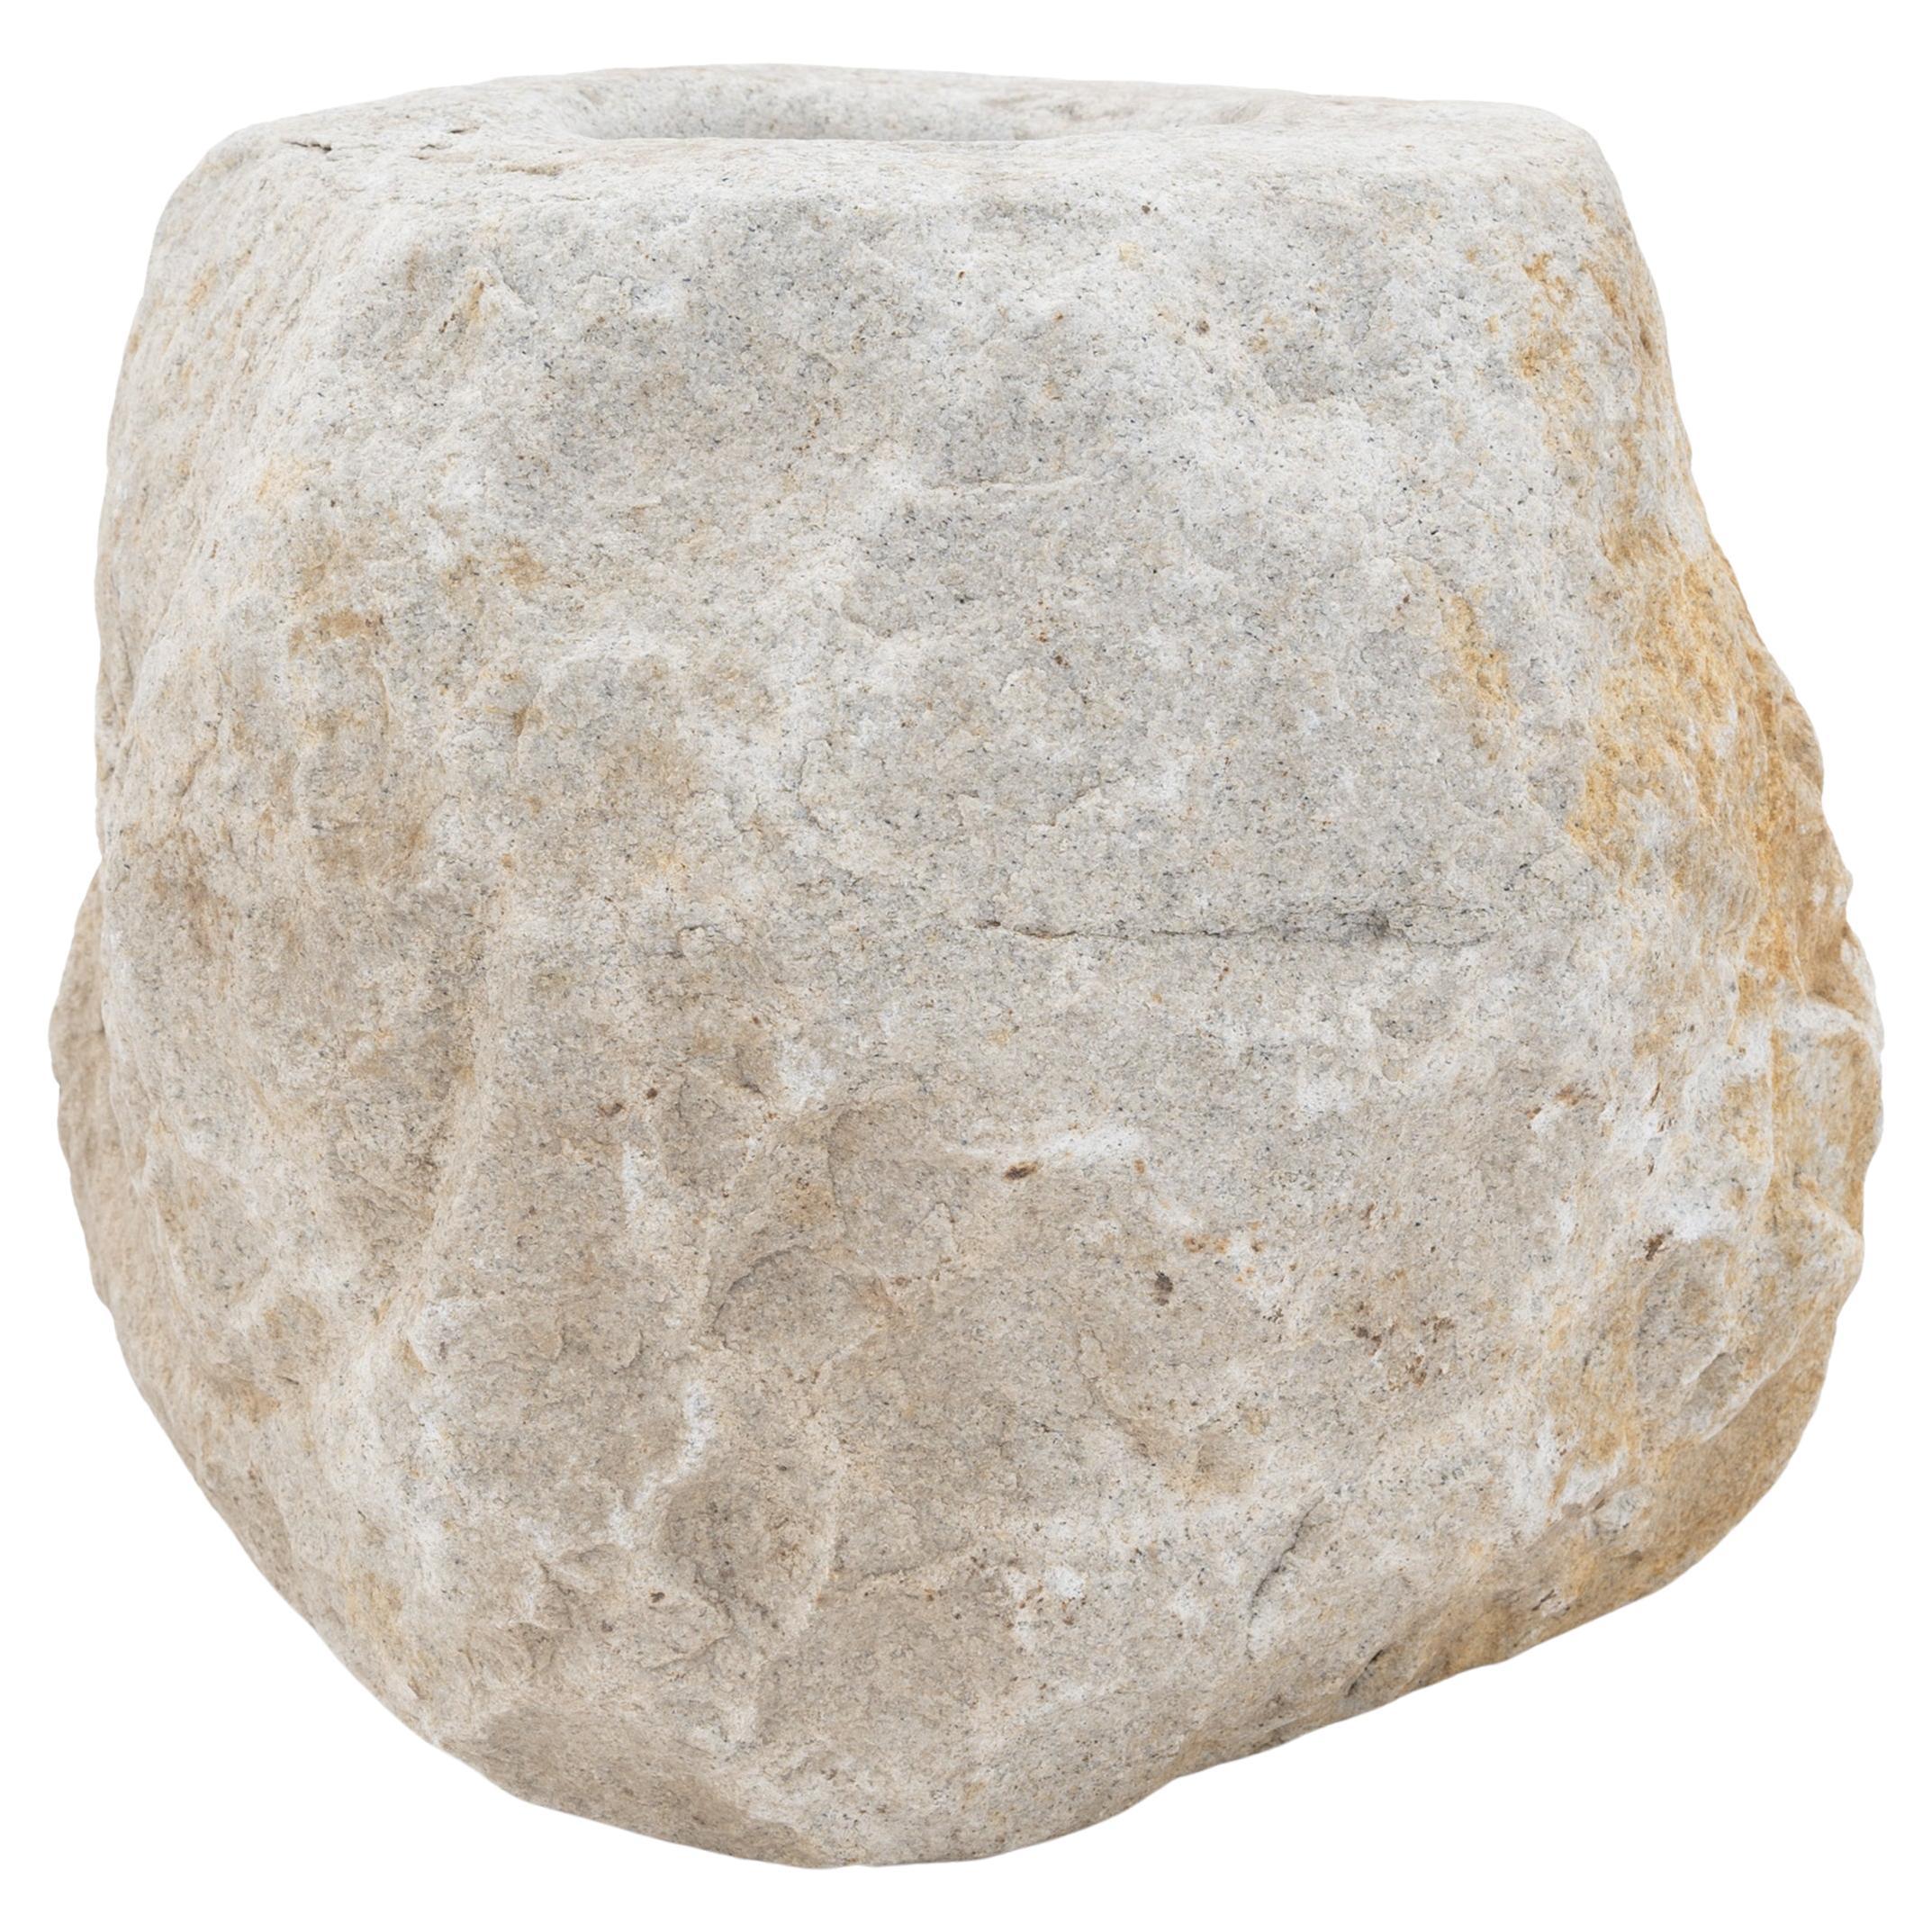 This stone mortar from the early 20th century was once used in a provincial kitchen to grind herbs, spices, rice, and other foods. Hand-carved from a solid block of limestone, the mortar has a minimally worked form that preserves the natural beauty